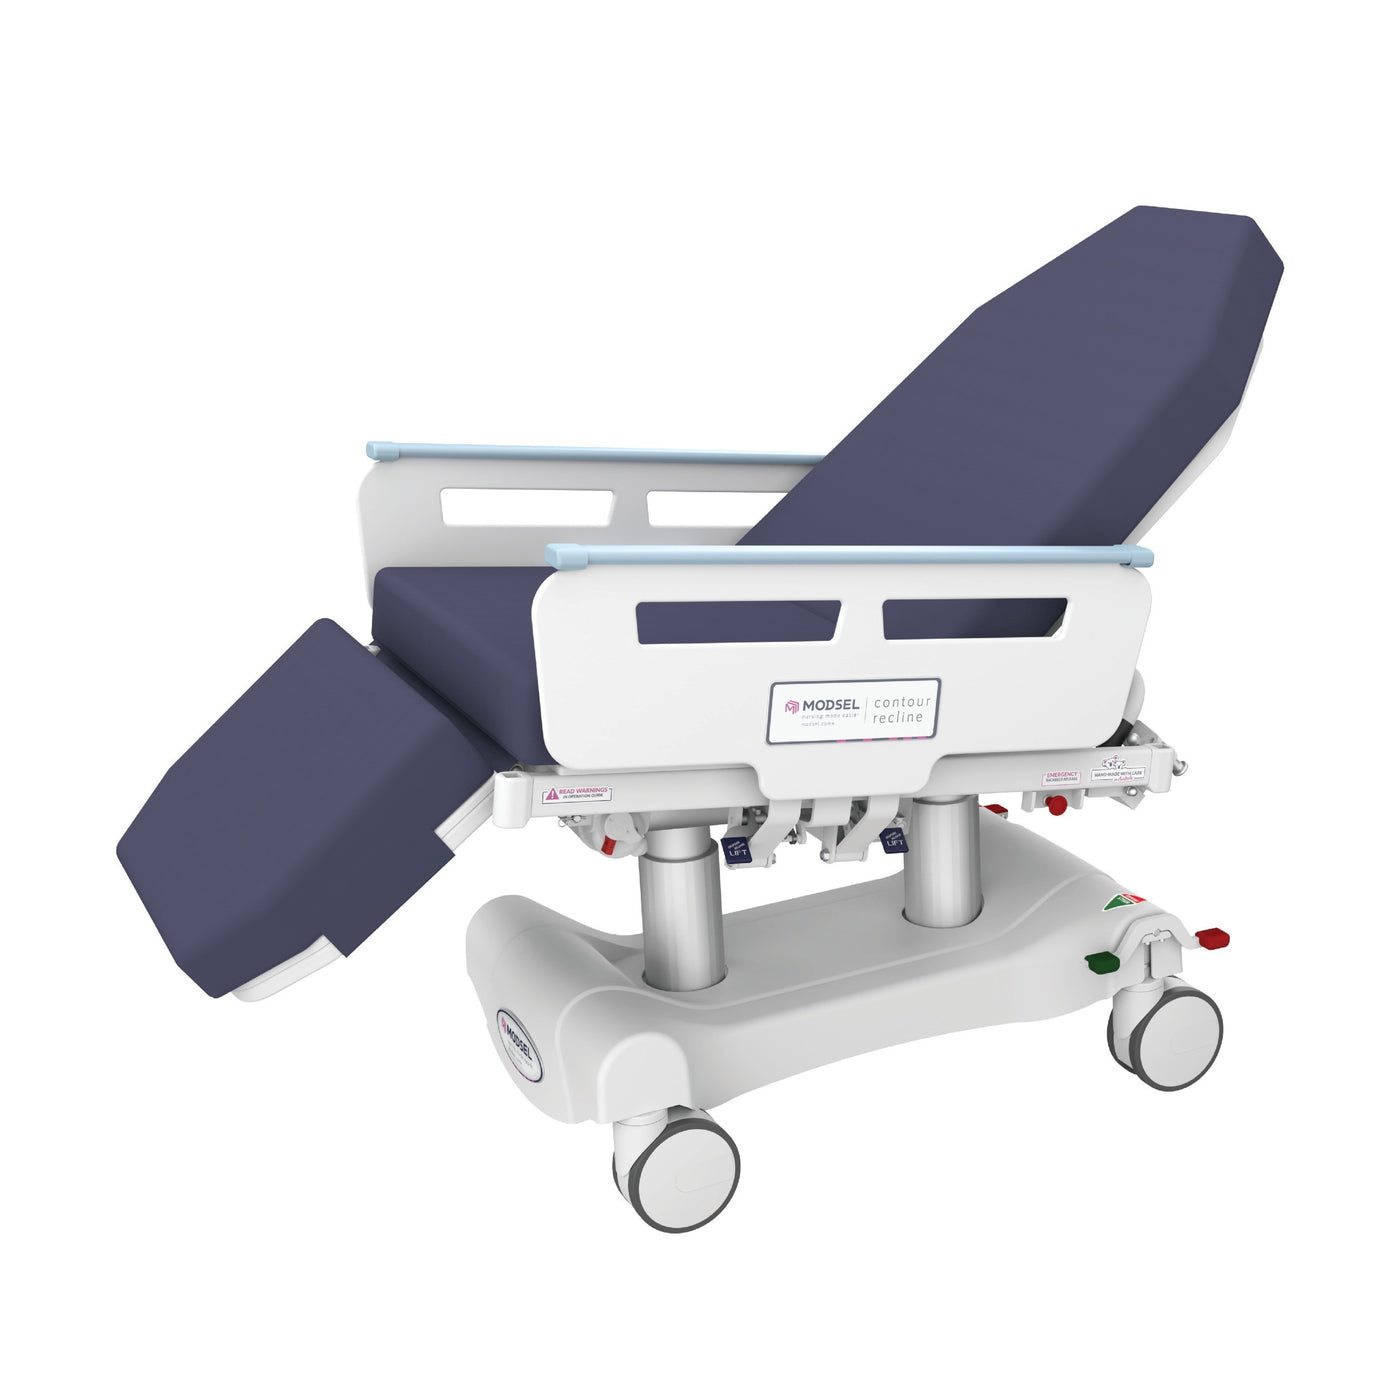 Modsel procedure chairs and trolleys